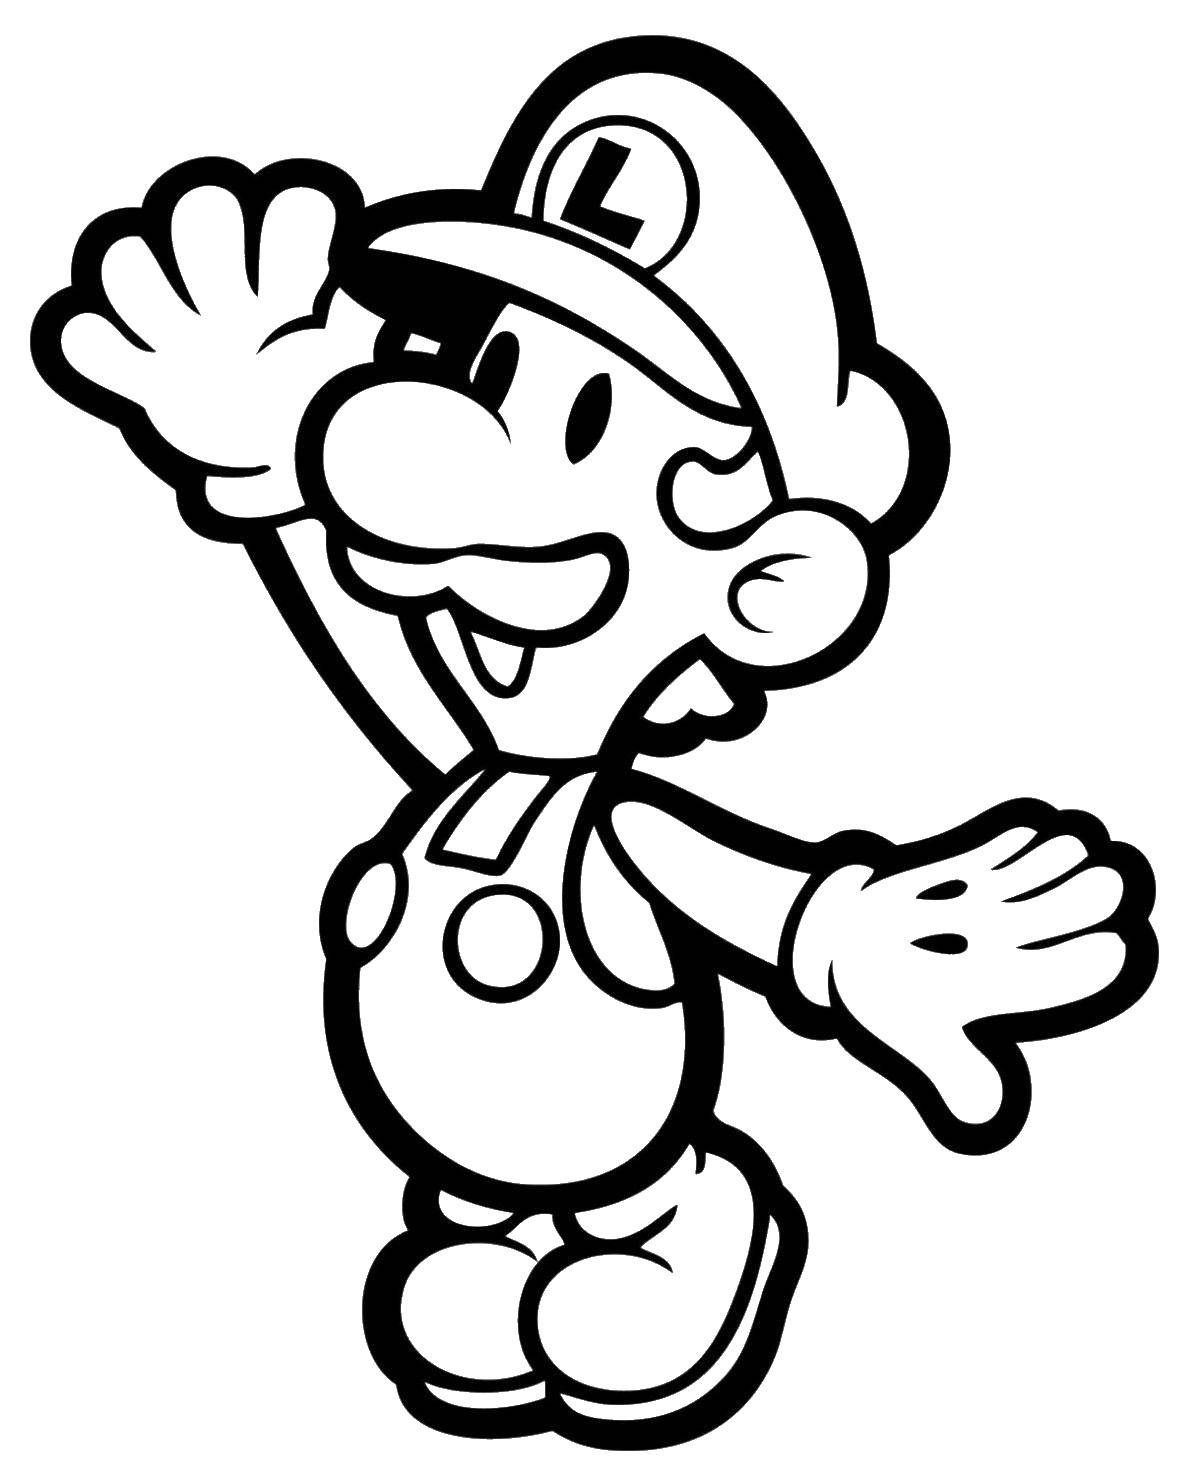 Coloring Brother Luigi. Category The character from the game. Tags:  Games, Mario.